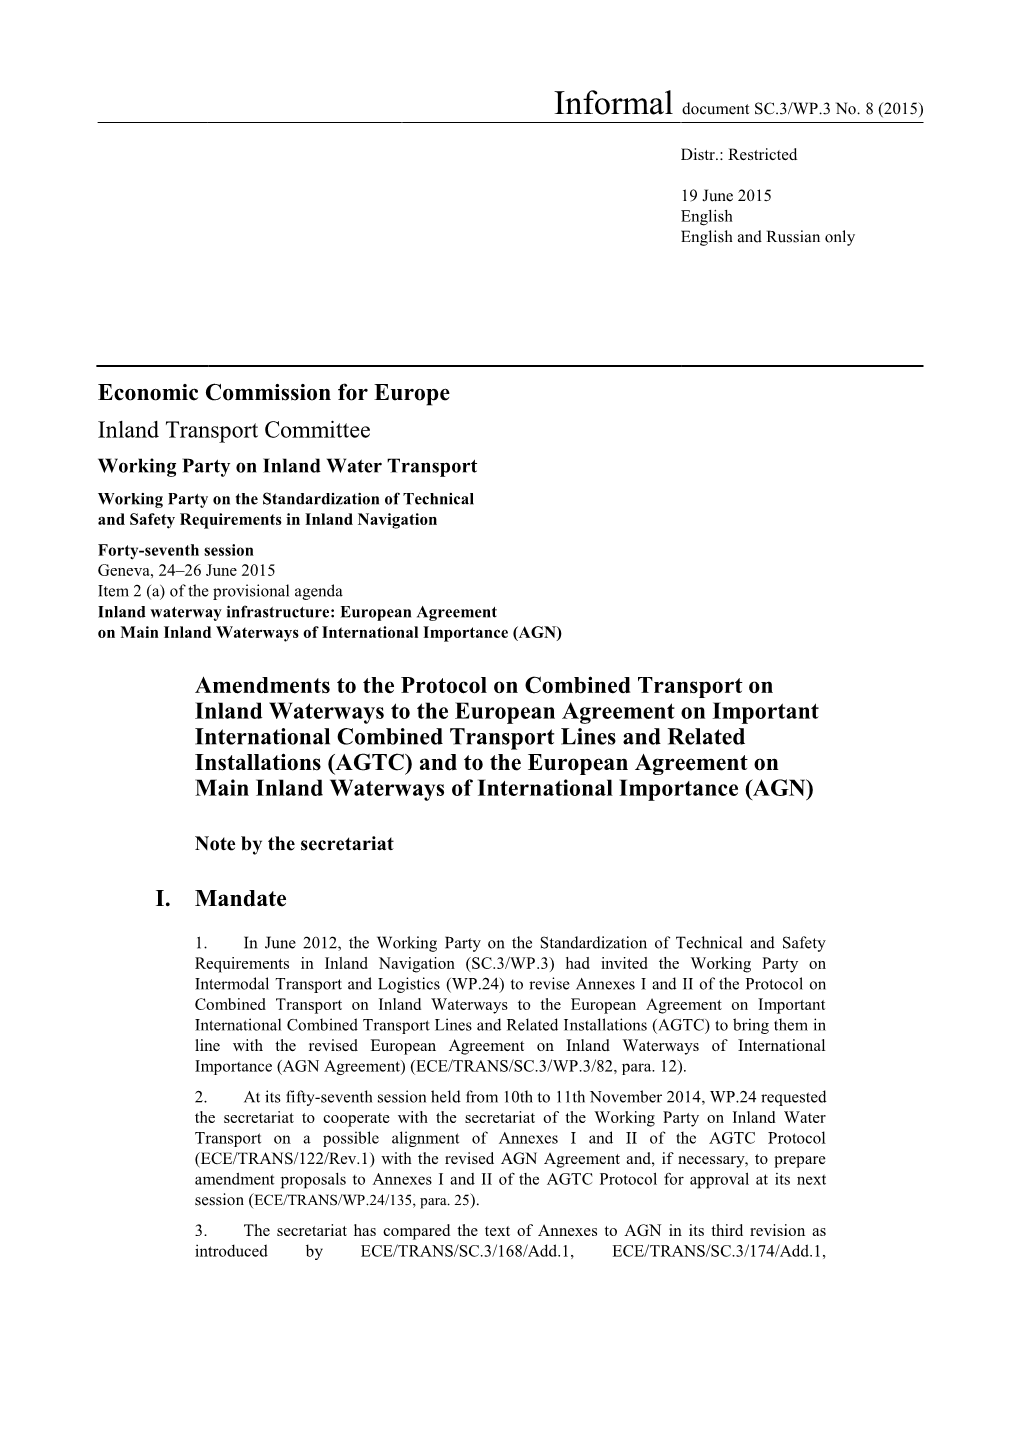 Economic Commission for Europe Inland Transport Committee